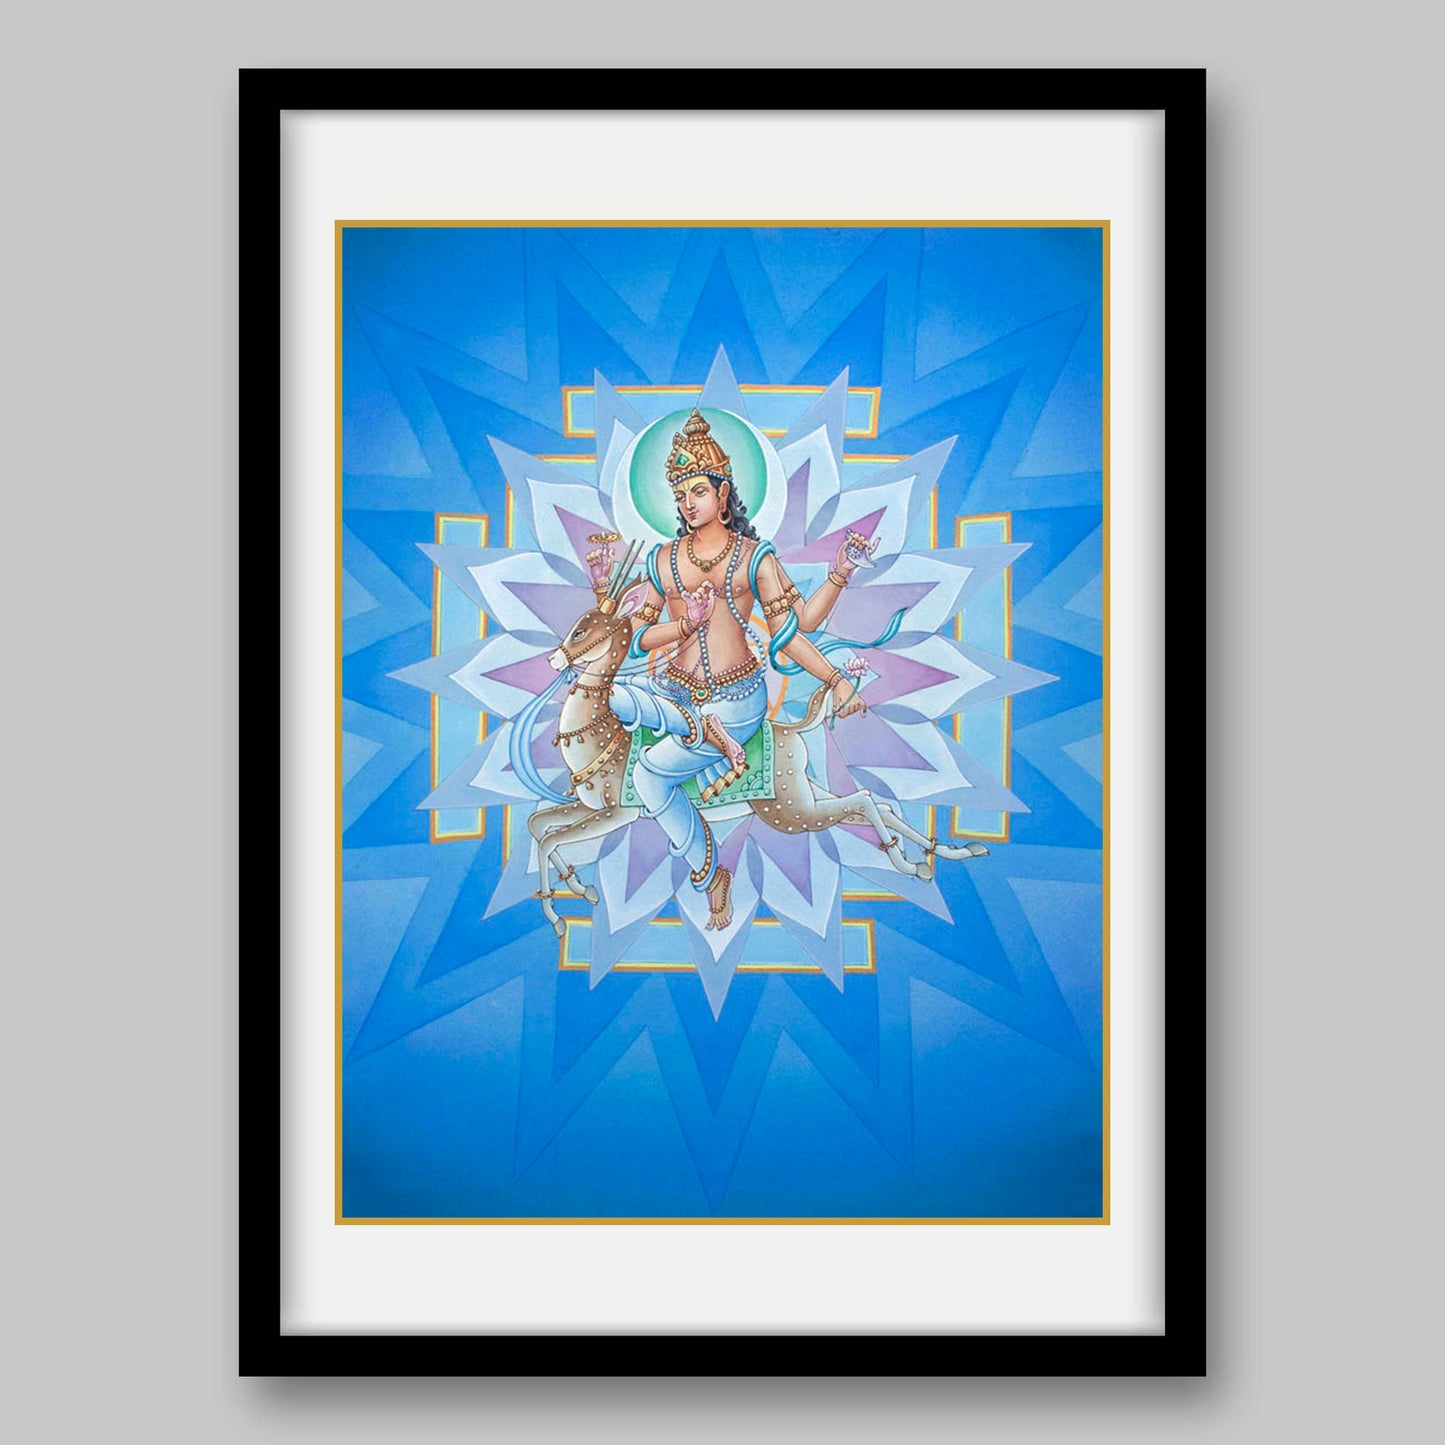 Chandra - High Quality Print of Artwork by Pieter Weltevrede